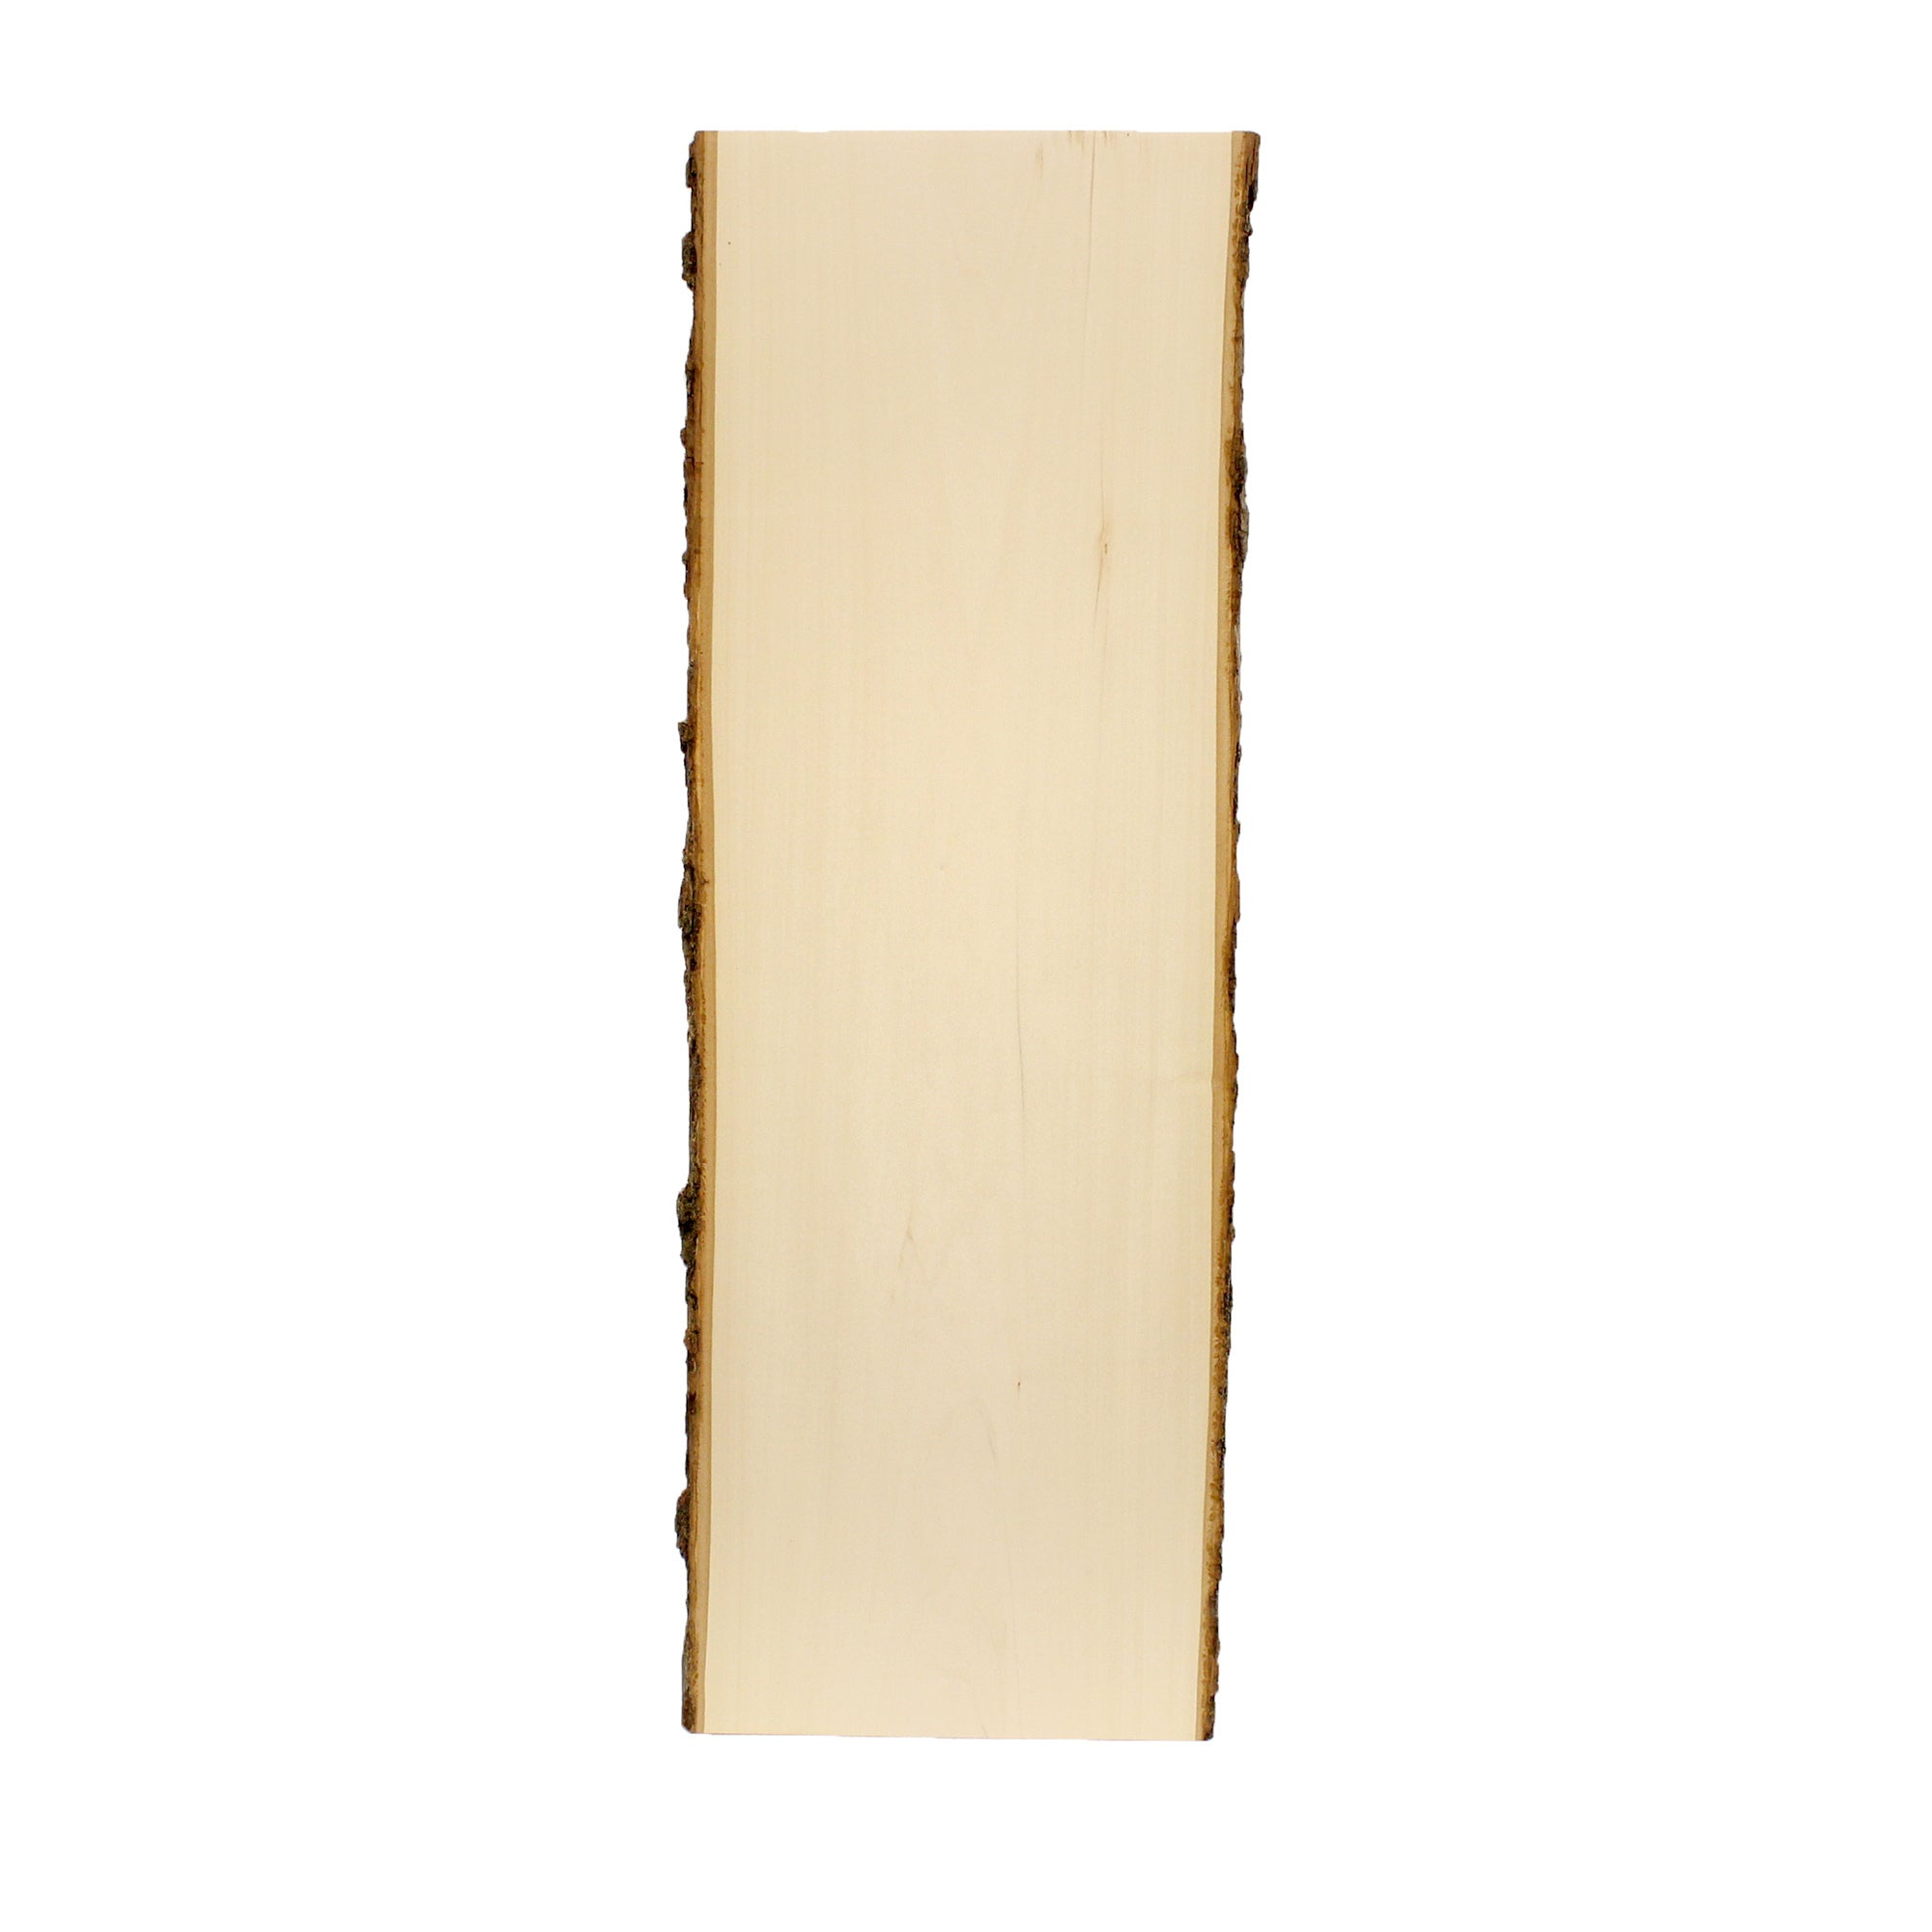 Wood Plank Natural 11 X 8 with Bark - Save-On-Crafts